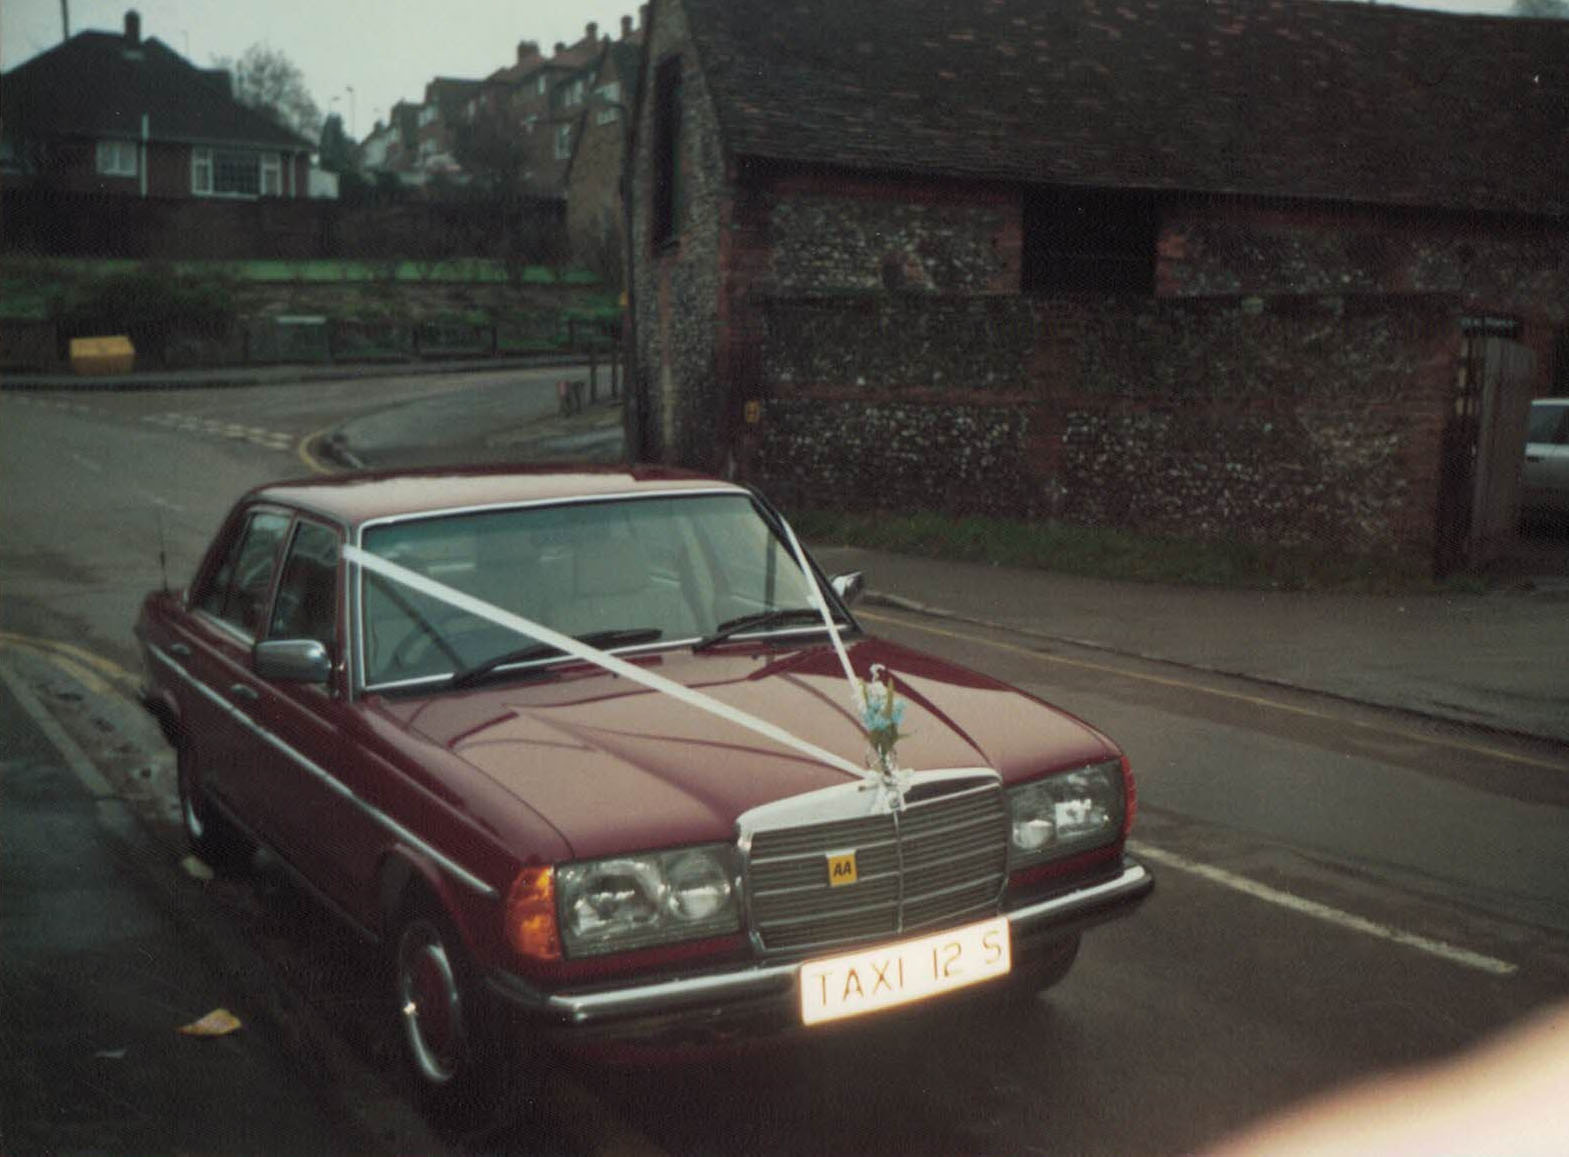 TAXI12S in Copyground Lane, High Wycombe - circa 1990